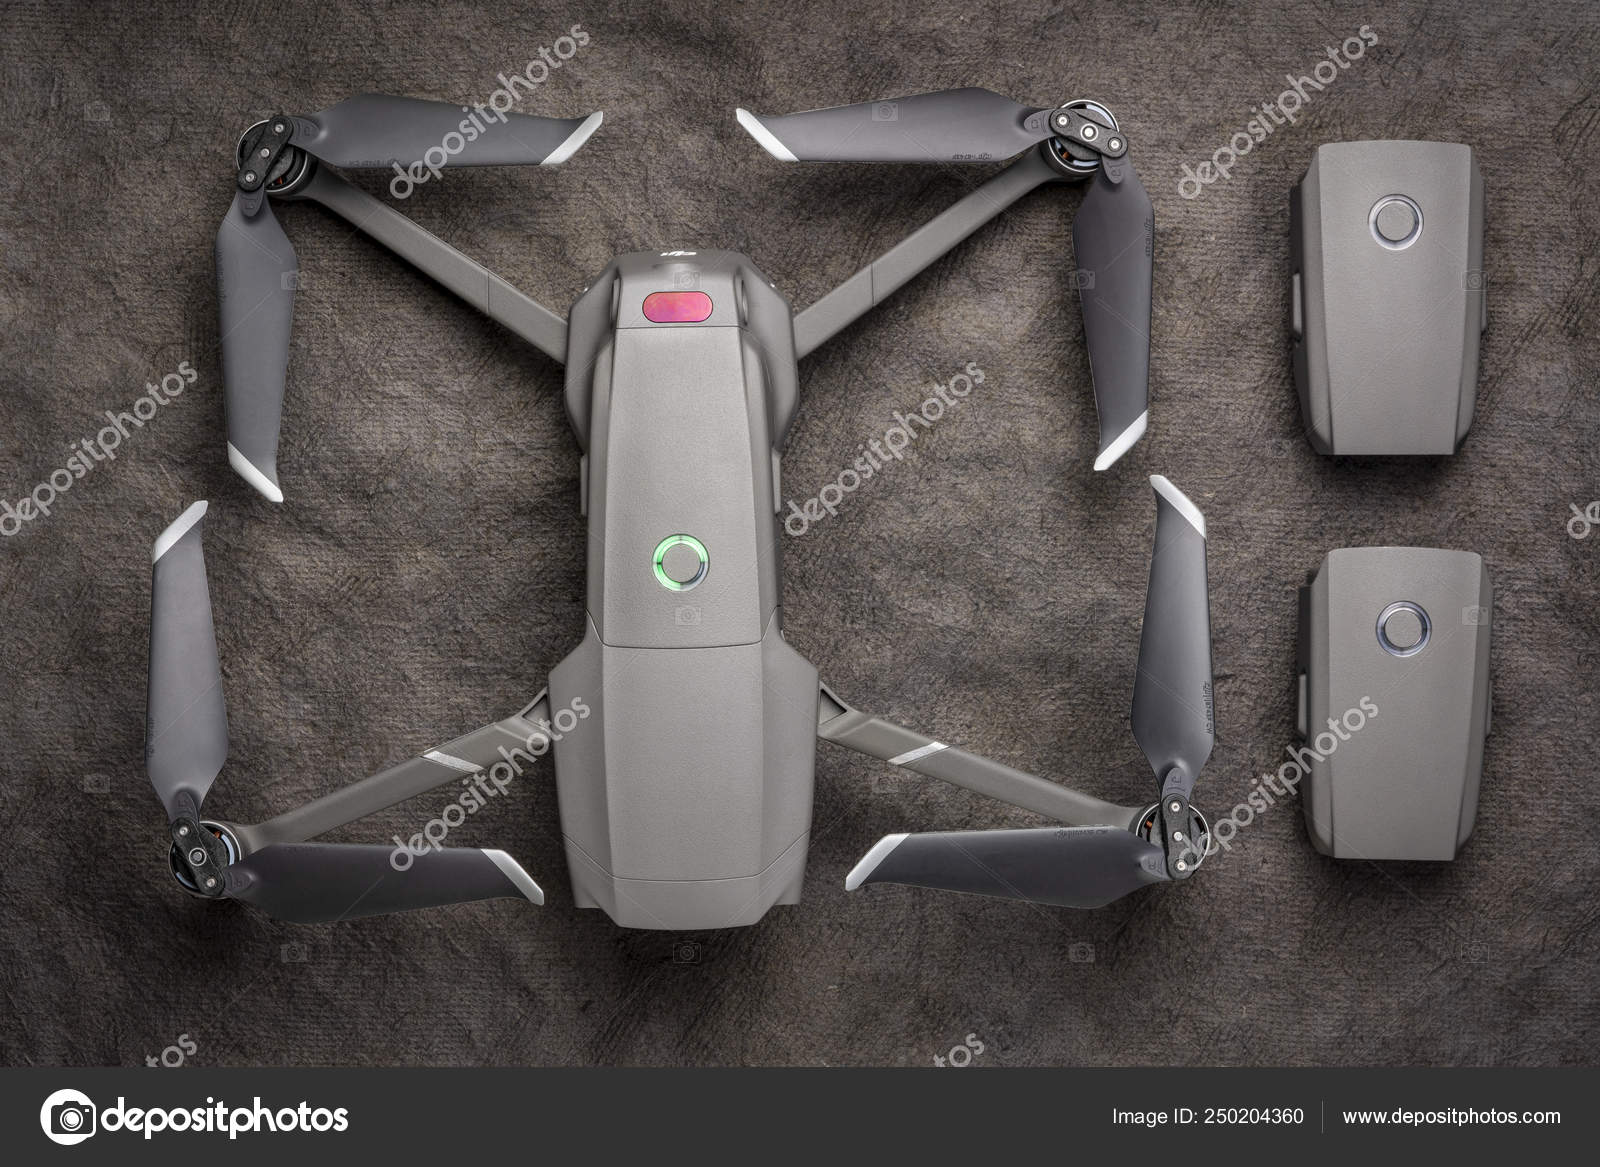 Mavic pro drone with spare batteries – Stock Editorial Photo PixelsAway #250204360